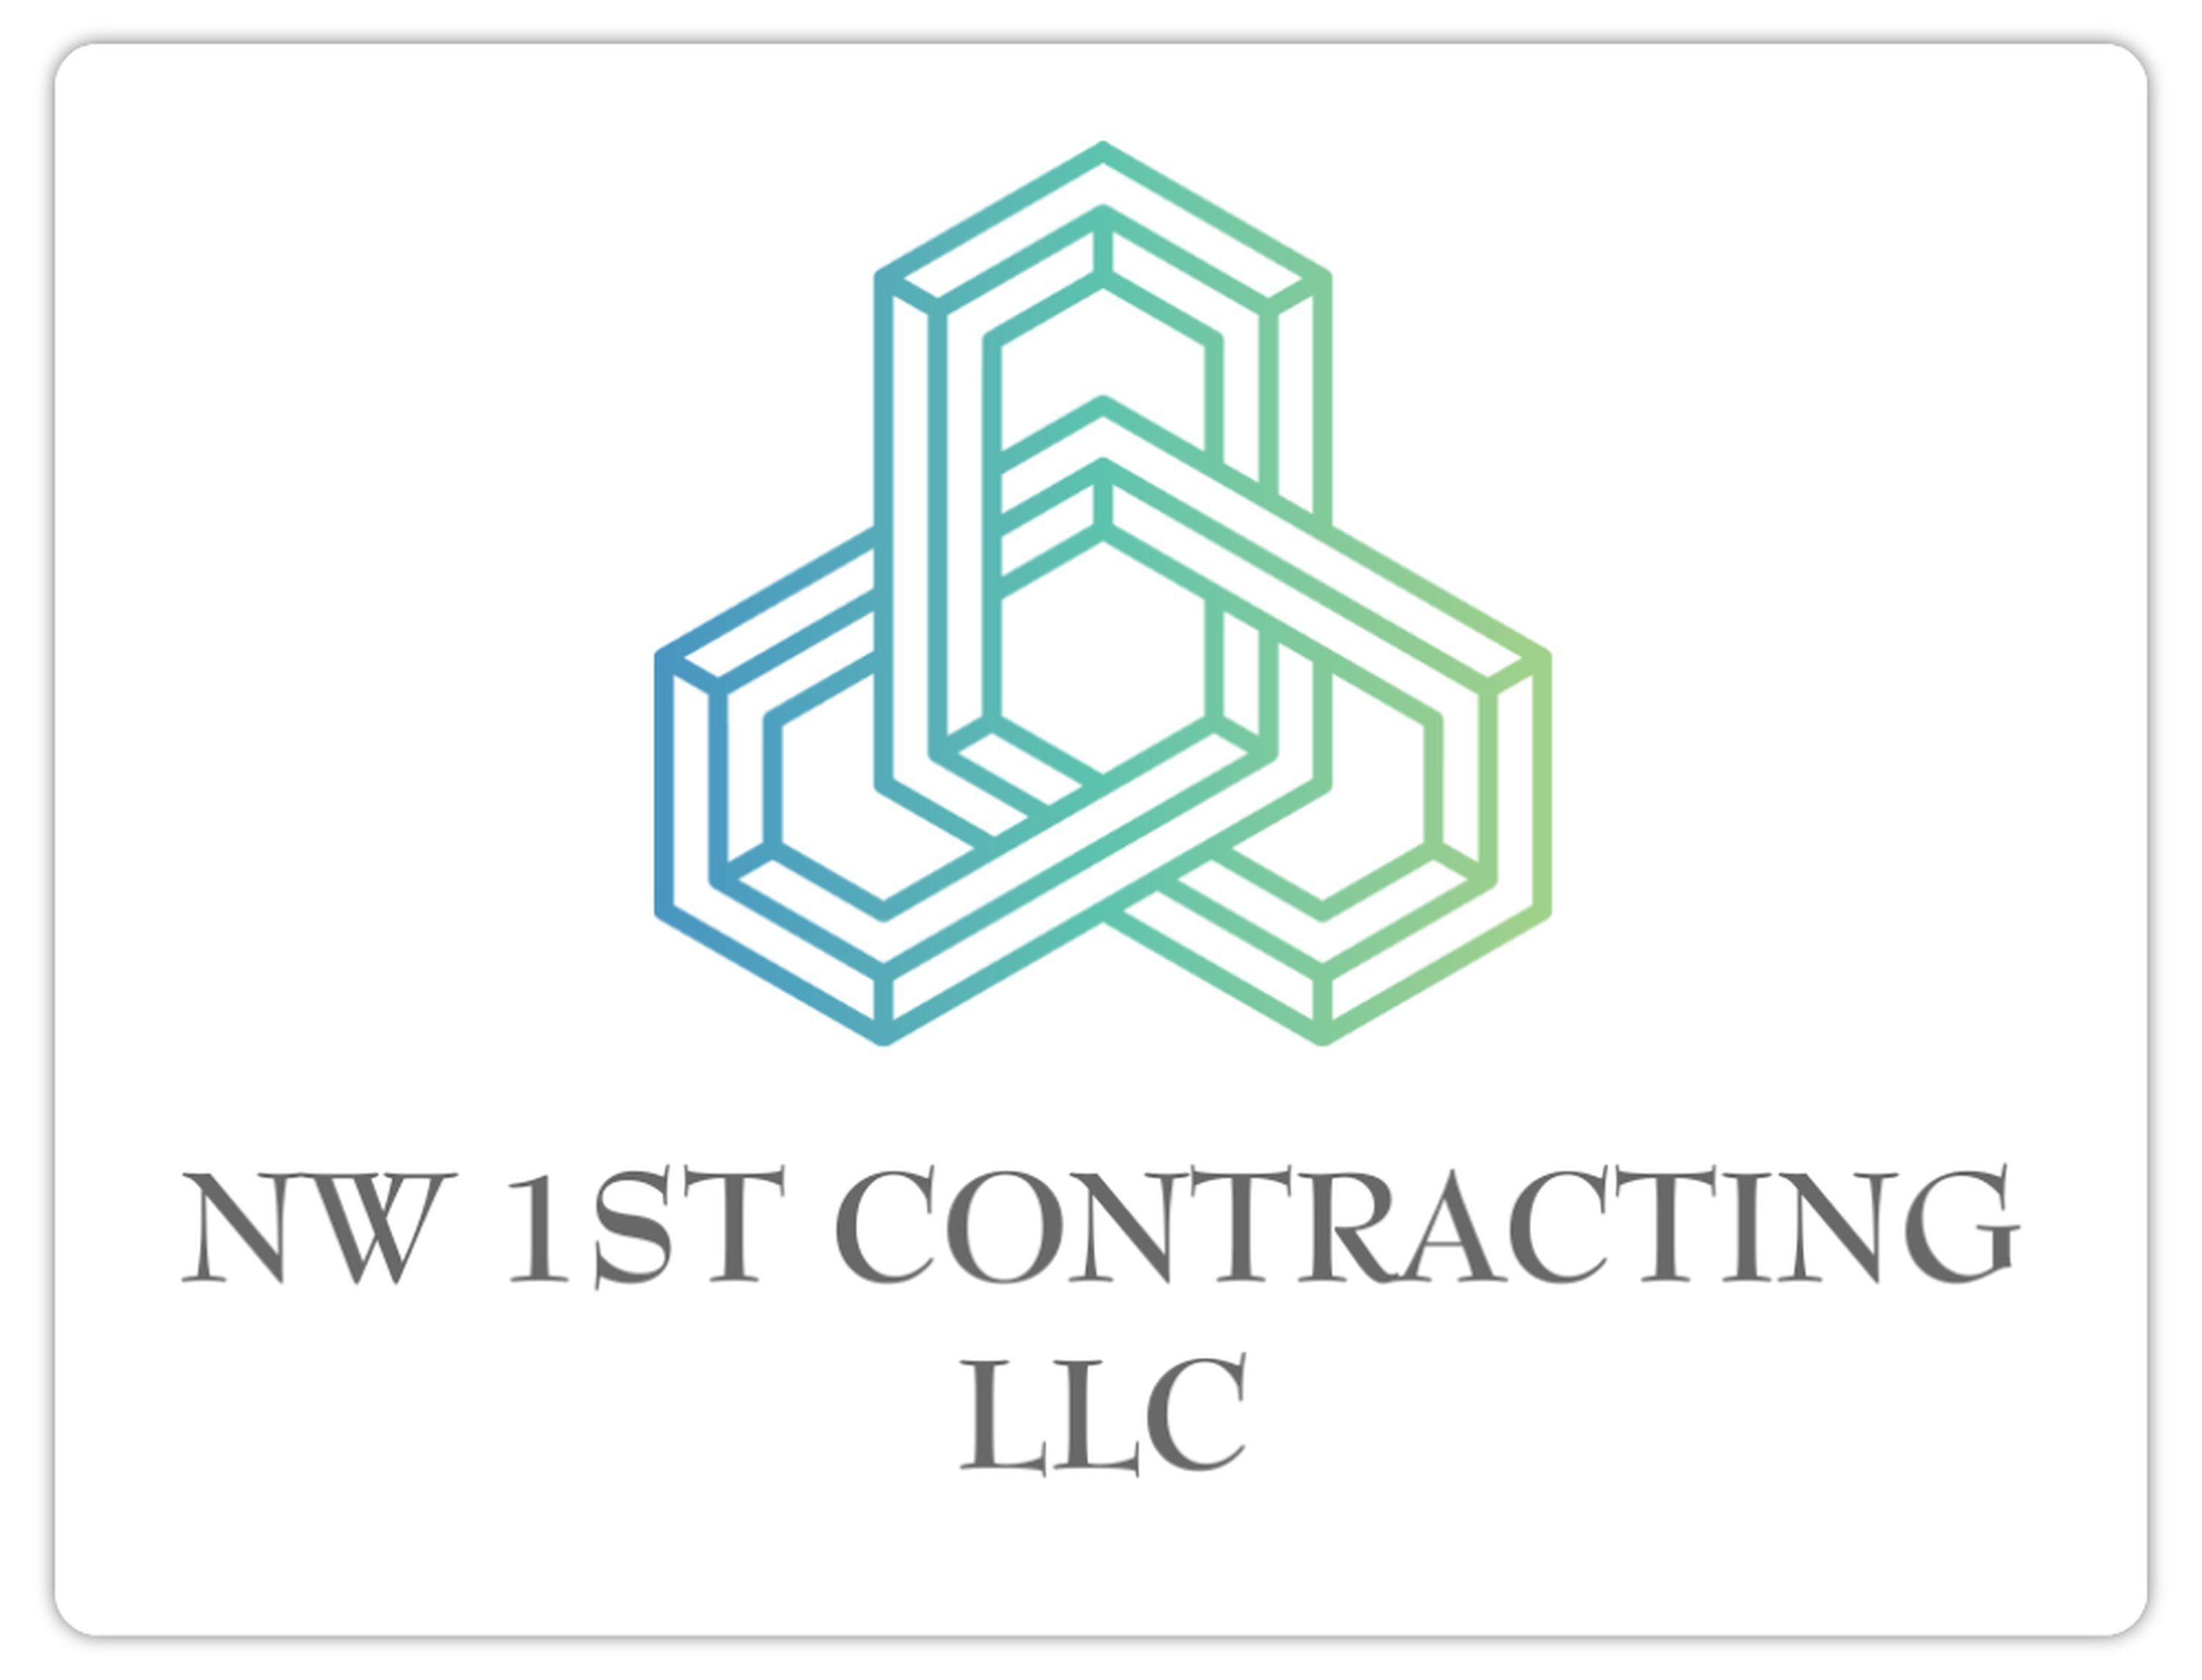 NW 1ST CONTRACTING LLC Logo